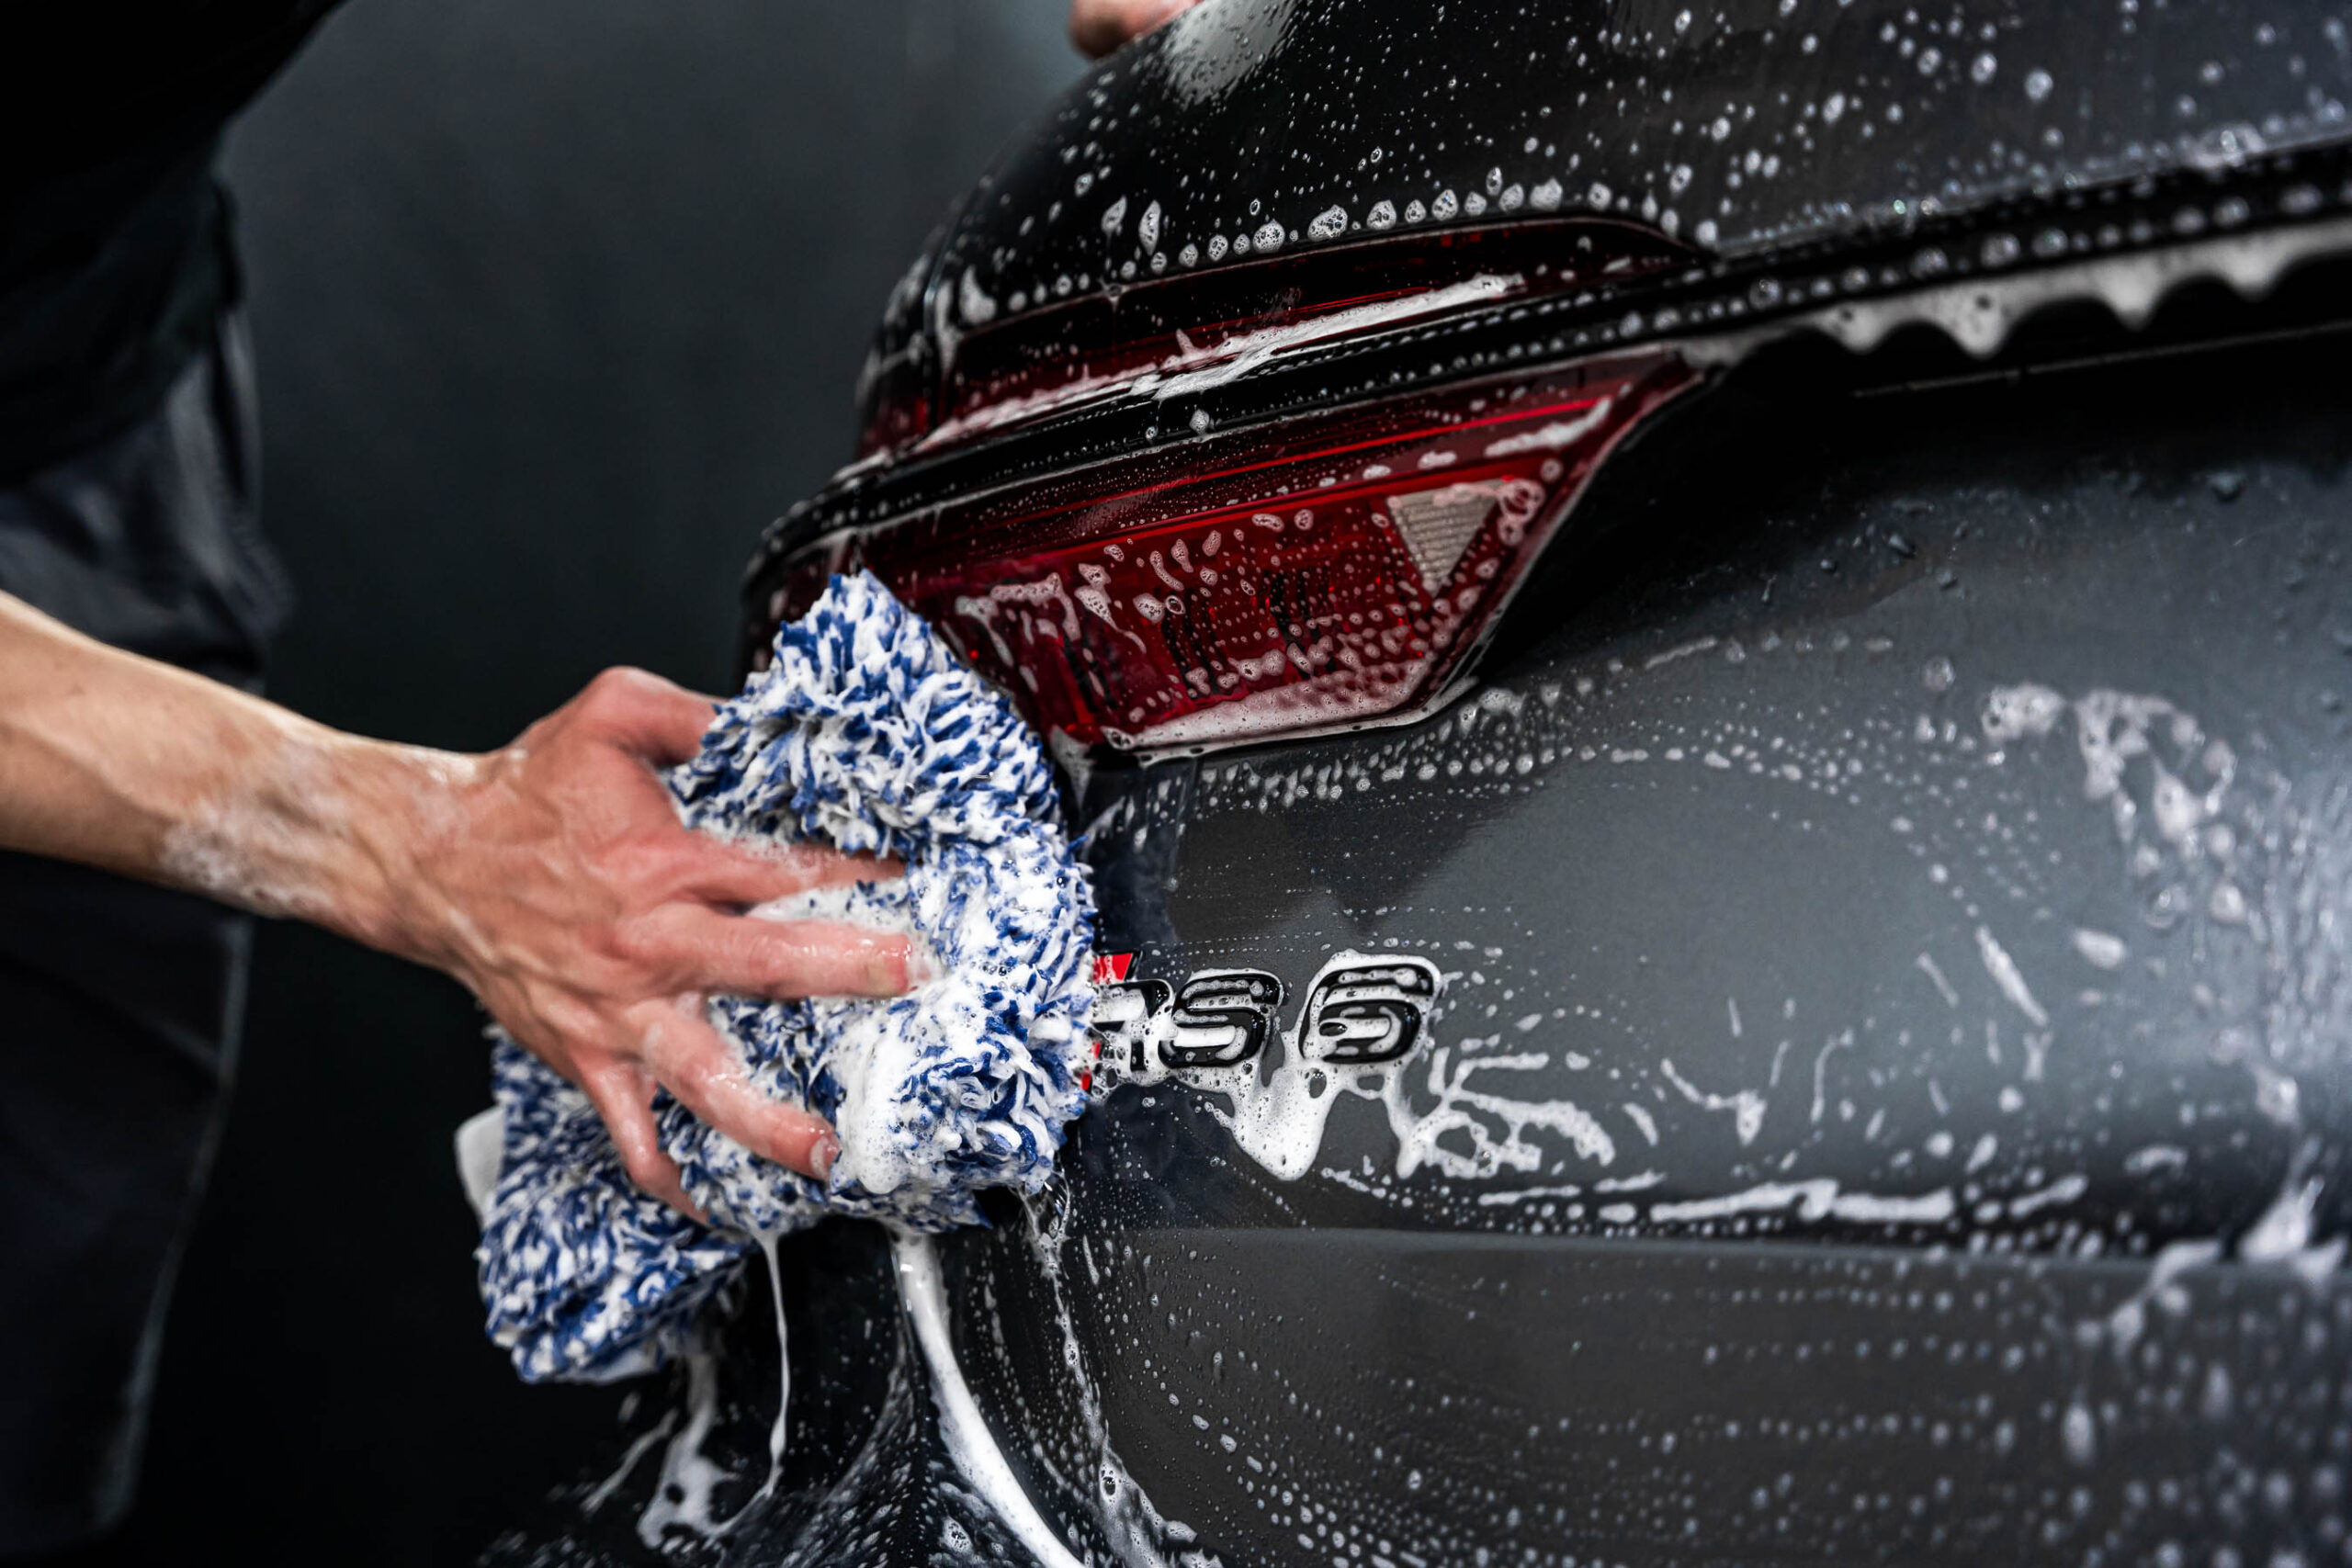 Using a wash mitt to do a contact wash